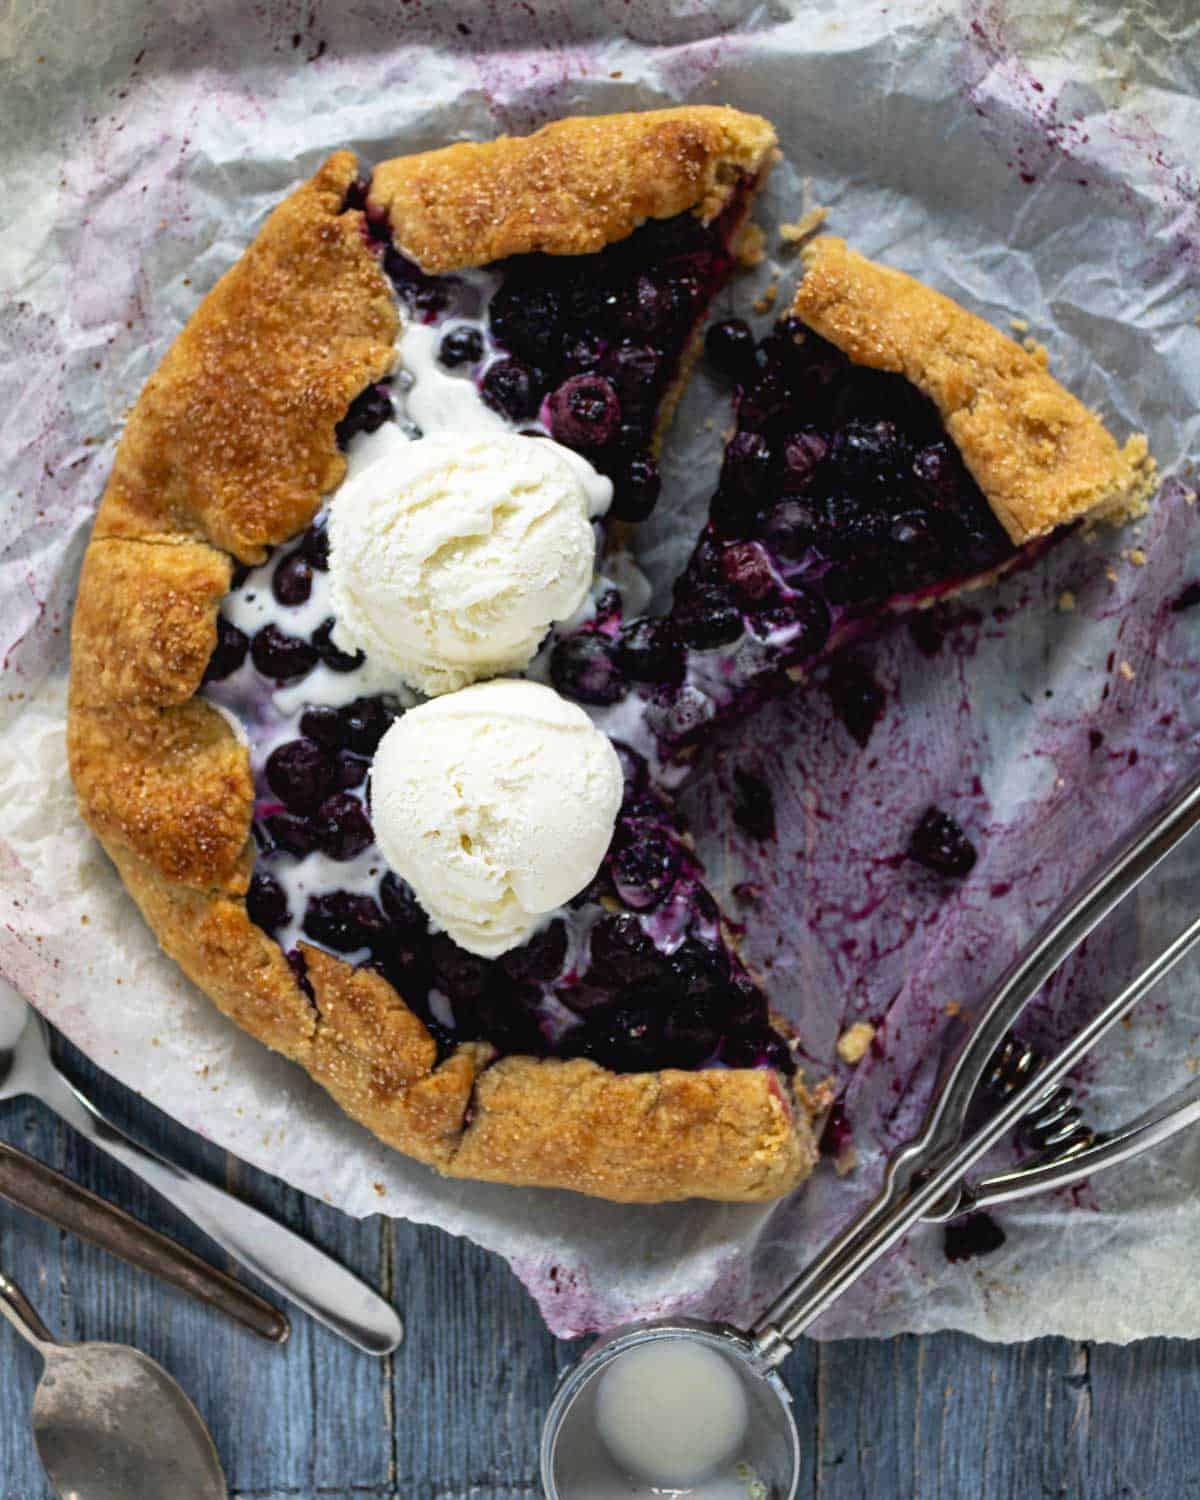 A Blueberries Galette on a blue rustic table with parchment paper shown from above. The galette has a lot of blueberries baked inside and two ice-cream balls on top